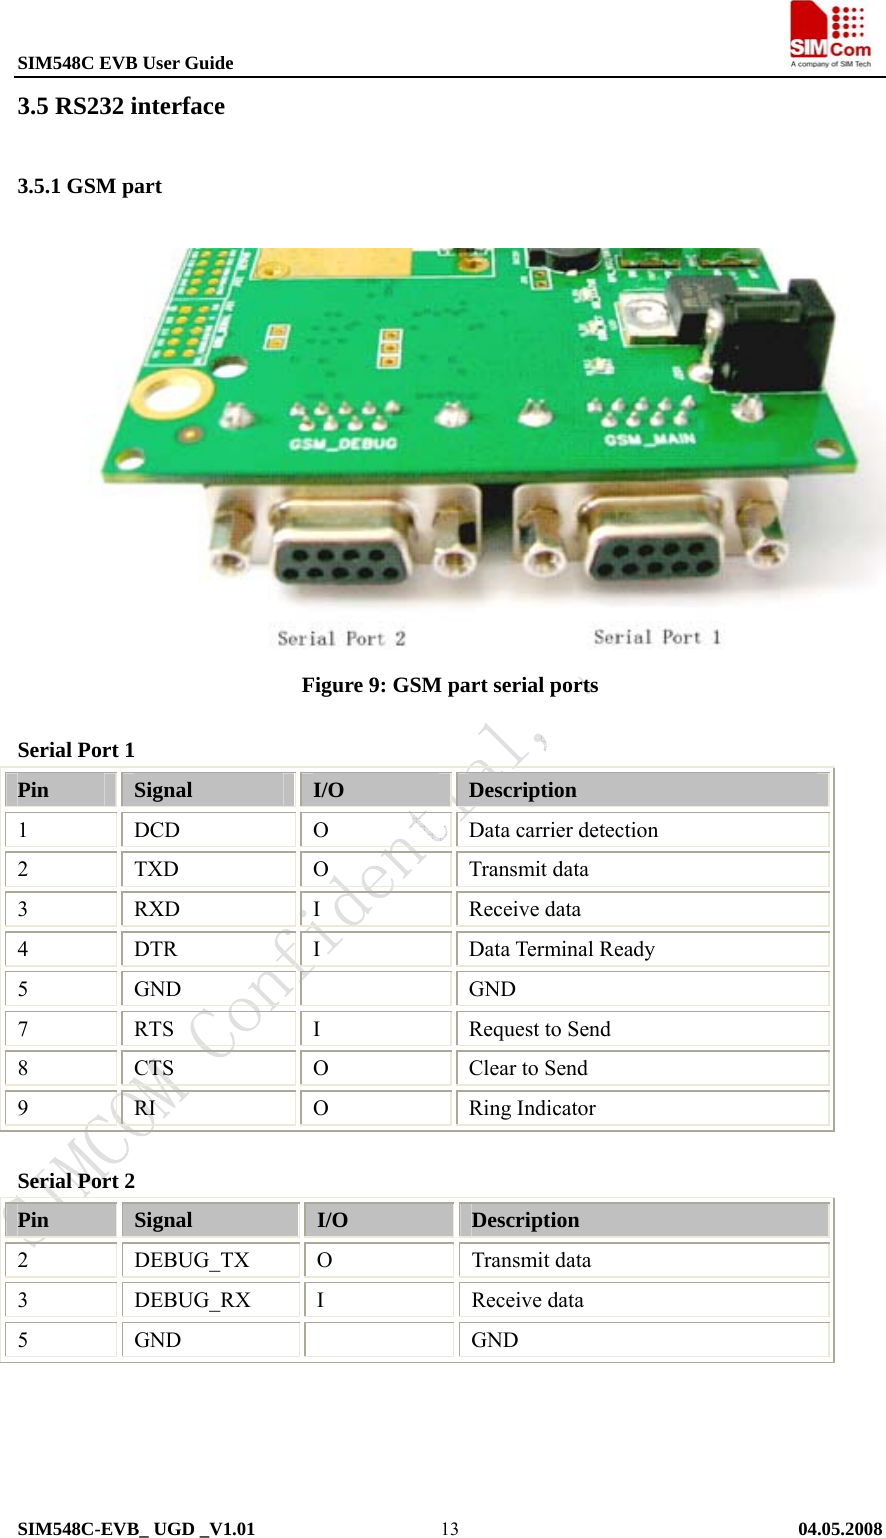 SIM548C EVB User Guide                                                             SIM548C-EVB_ UGD _V1.01   04.05.2008   133.5 RS232 interface 3.5.1 GSM part              Figure 9: GSM part serial ports  Serial Port 1 Pin  Signal  I/O  Description 1 DCD  O Data carrier detection 2 TXD  O Transmit data 3 RXD  I Receive data 4 DTR  I Data Terminal Ready 5 GND    GND 7 RTS  I Request to Send 8 CTS  O Clear to Send 9 RI  O Ring Indicator  Serial Port 2 Pin  Signal  I/O  Description 2 DEBUG_TX O Transmit data 3 DEBUG_RX I Receive data 5 GND    GND  